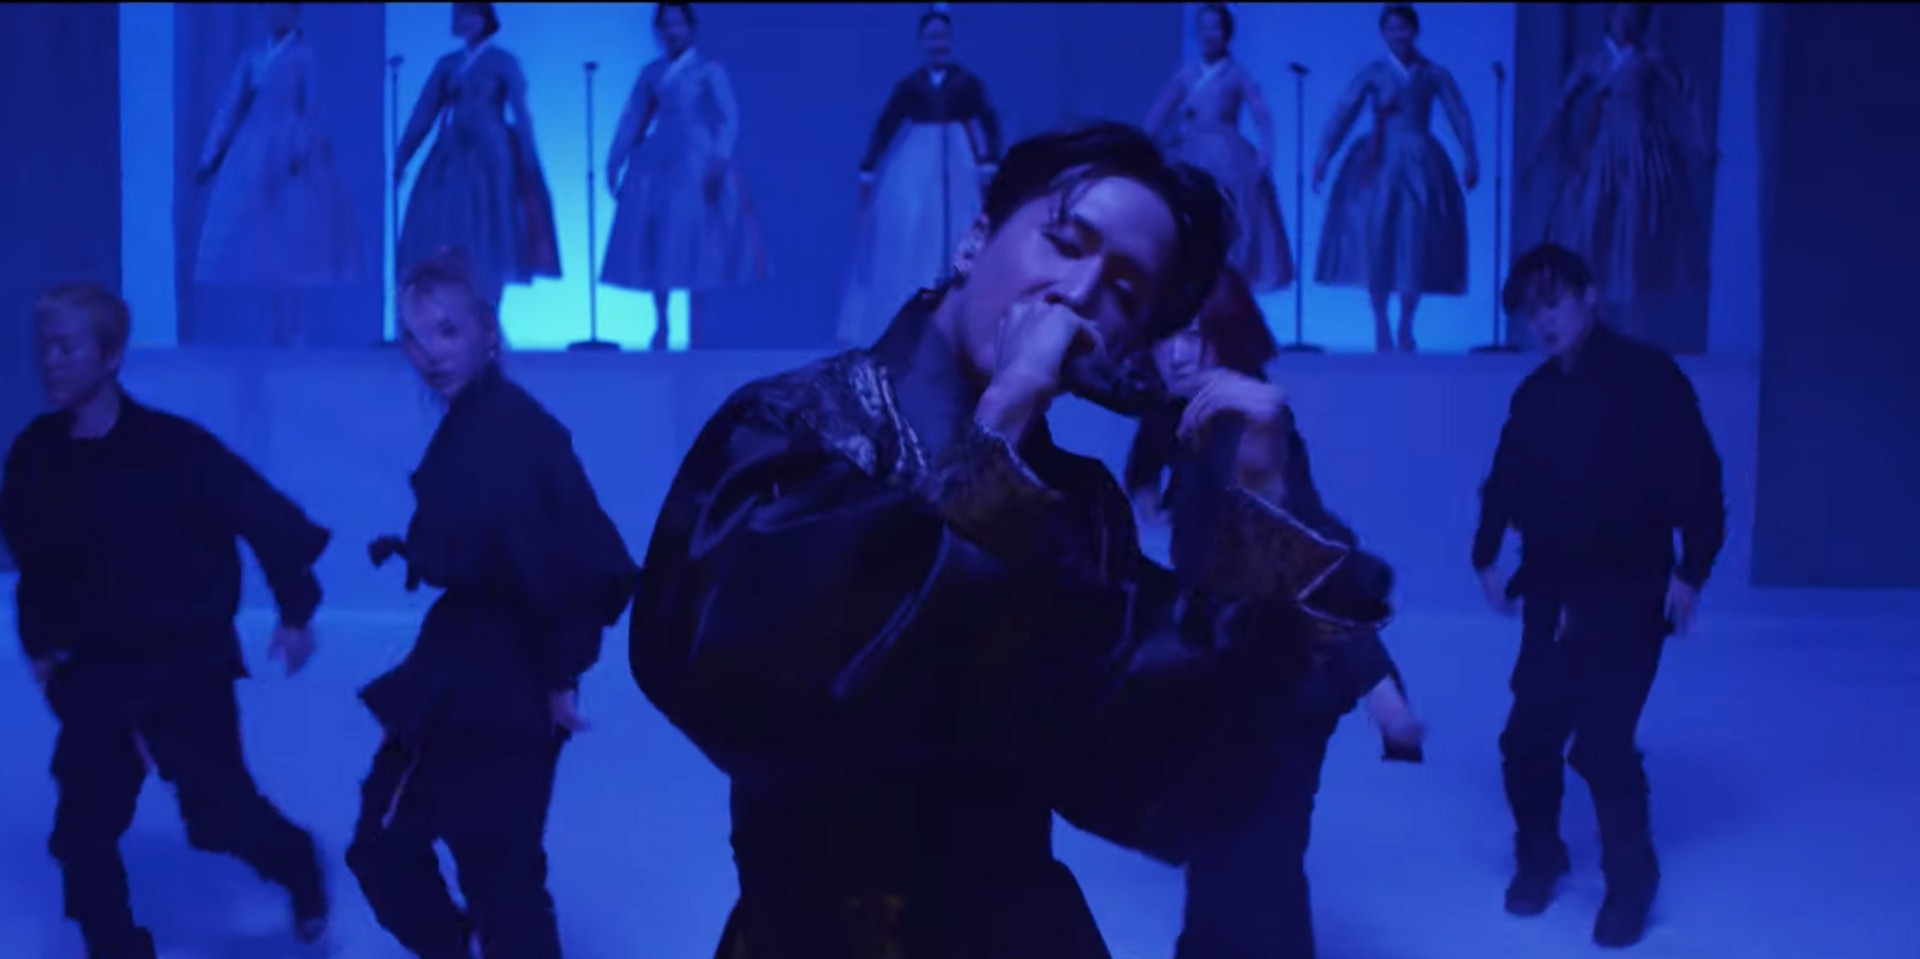 RAVI showcases Korean culture in performance video of 'Tiger' featuring Chillin Homie and Kid Milli – watch